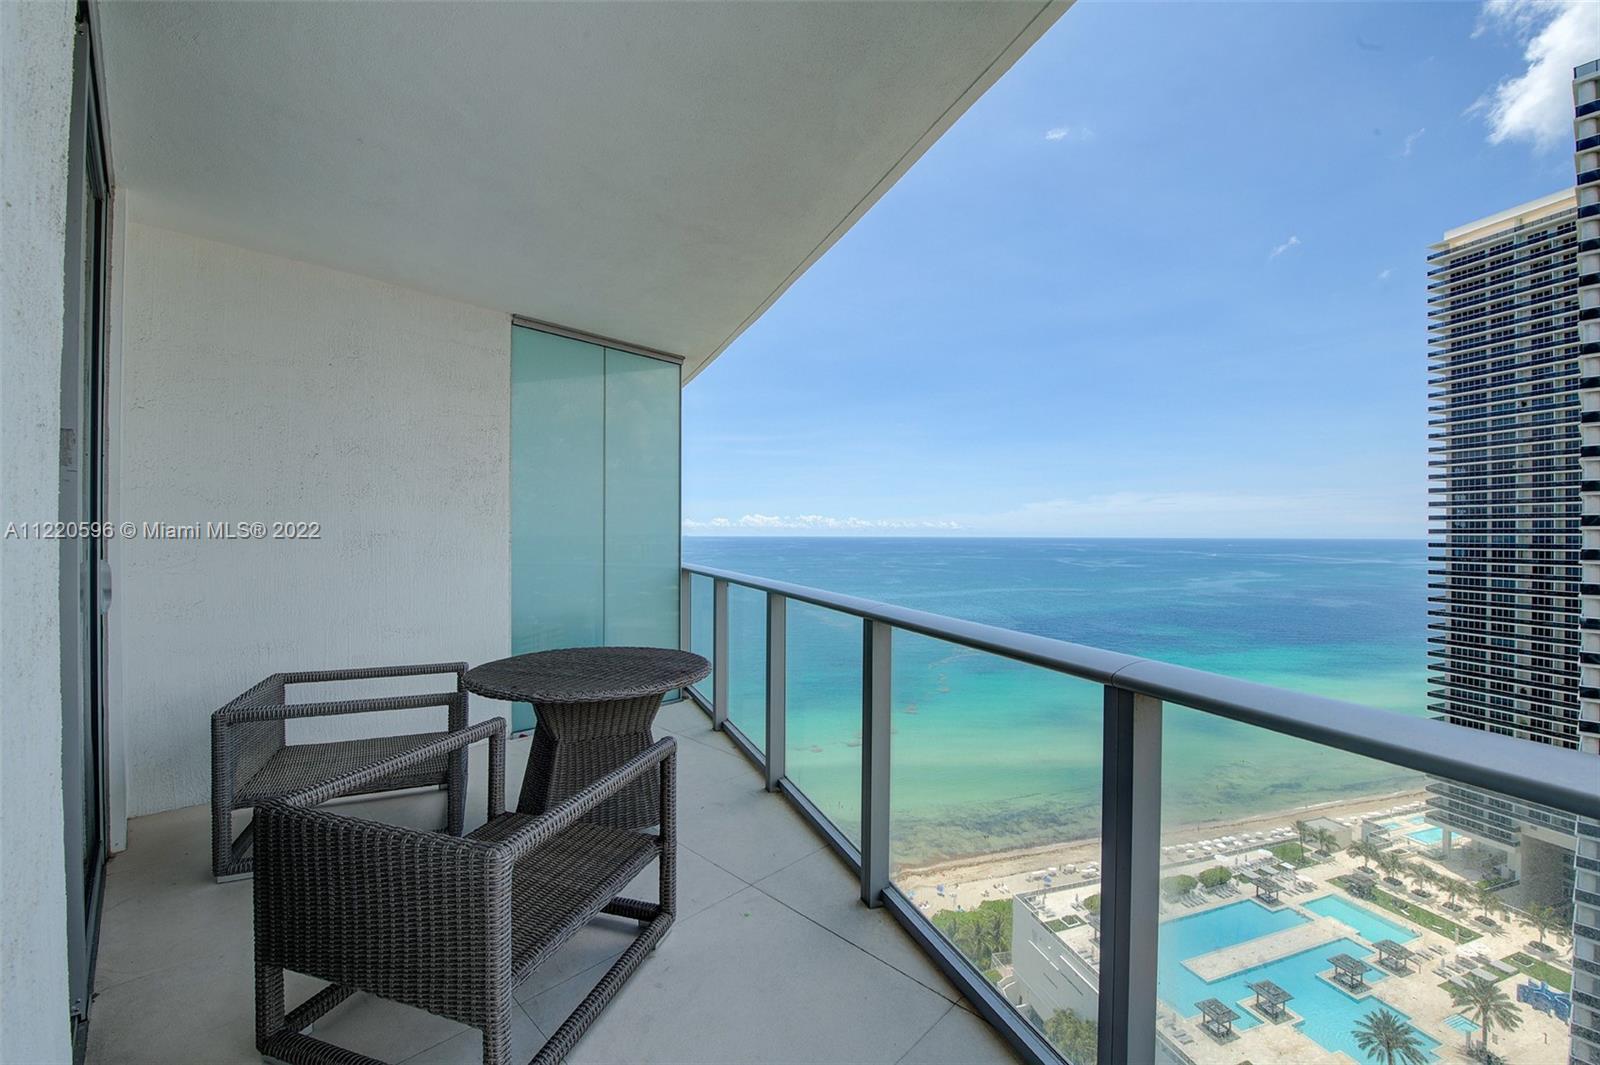 GORGEOUS 1 BEDROOM UNIT ON A HIGH FLOOR WITH BREATHTAKING VIEWS OF THE OCEAN, POOL AND INTRACOASTAL.